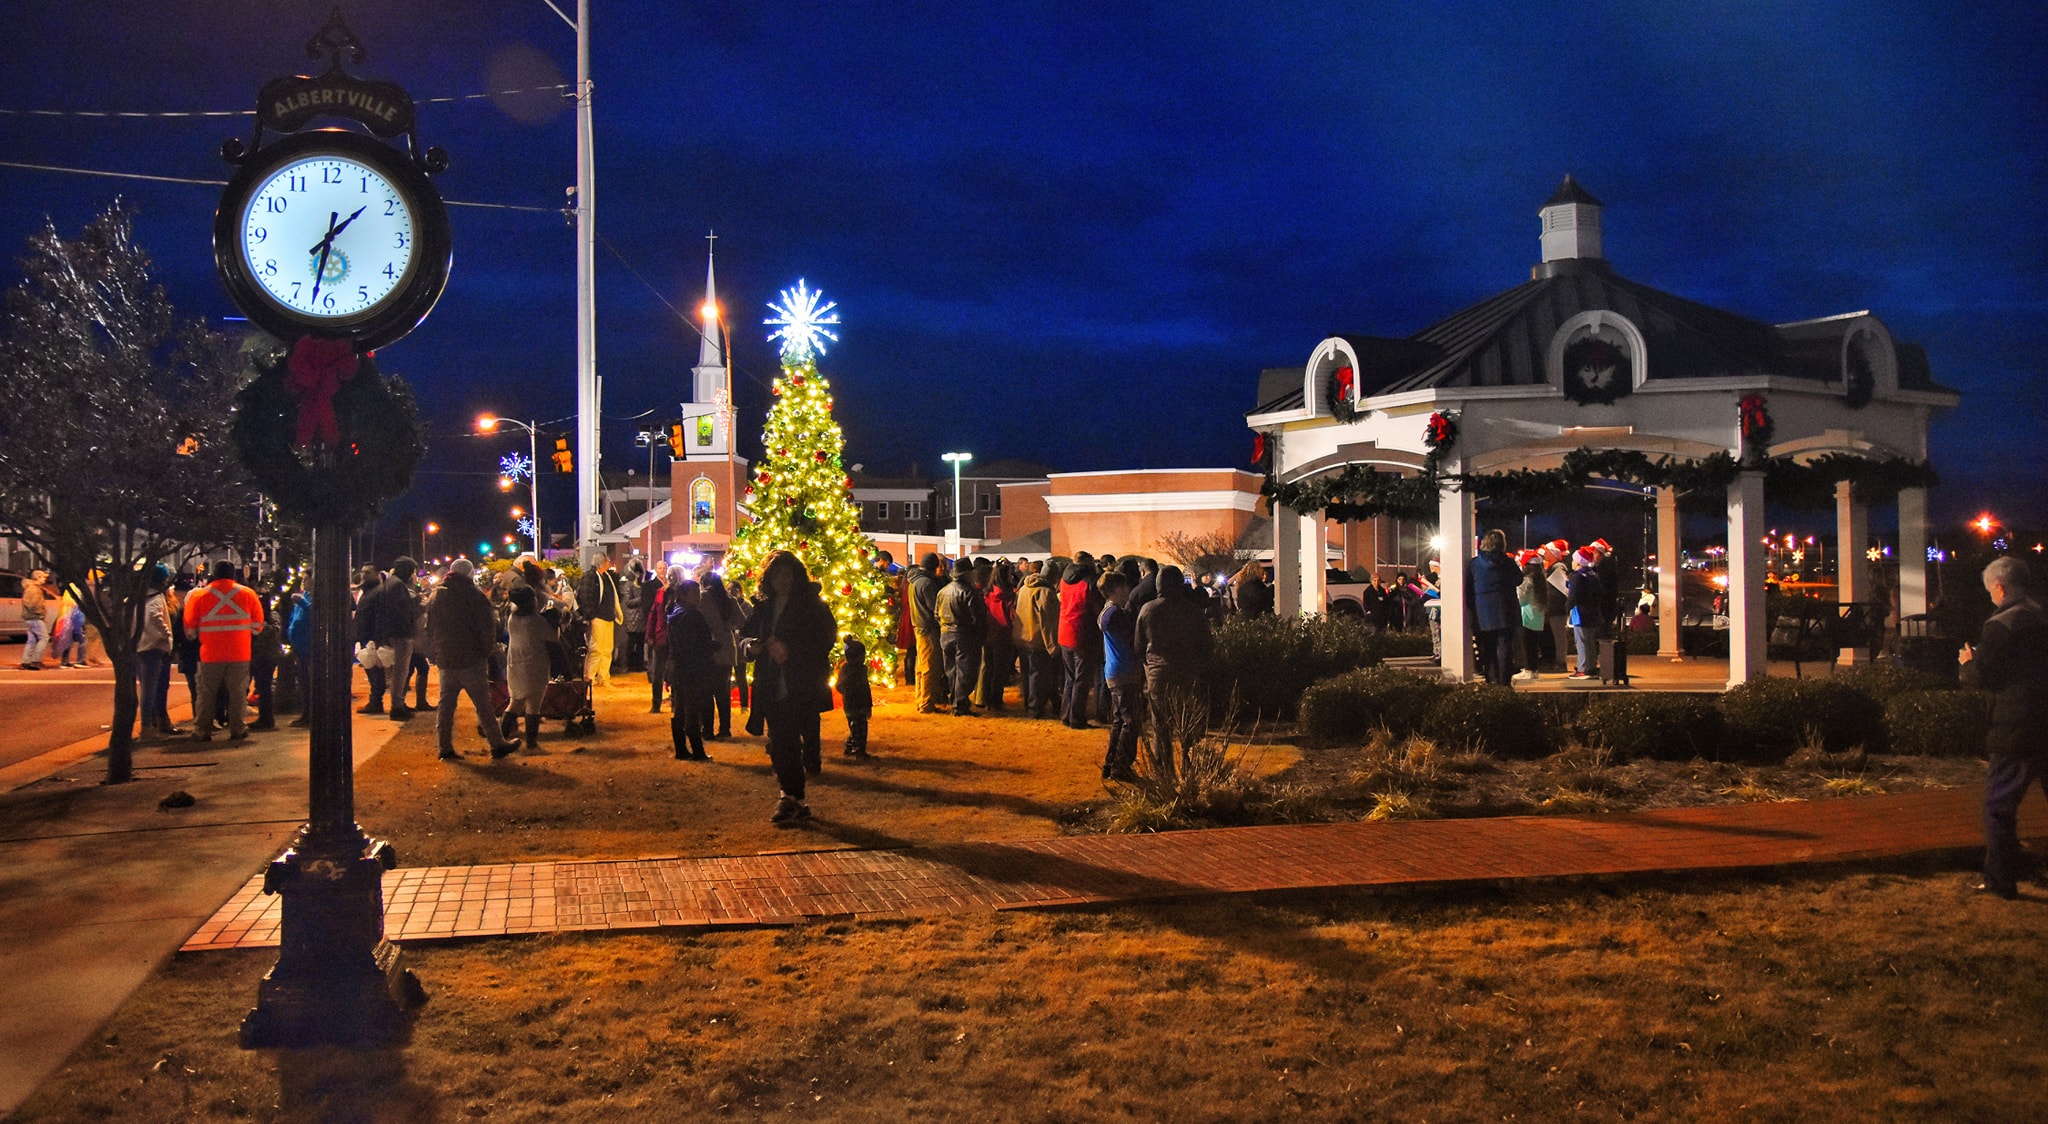 5 wonderful Alabama Christmas events, all within 2 hours of Birmingham